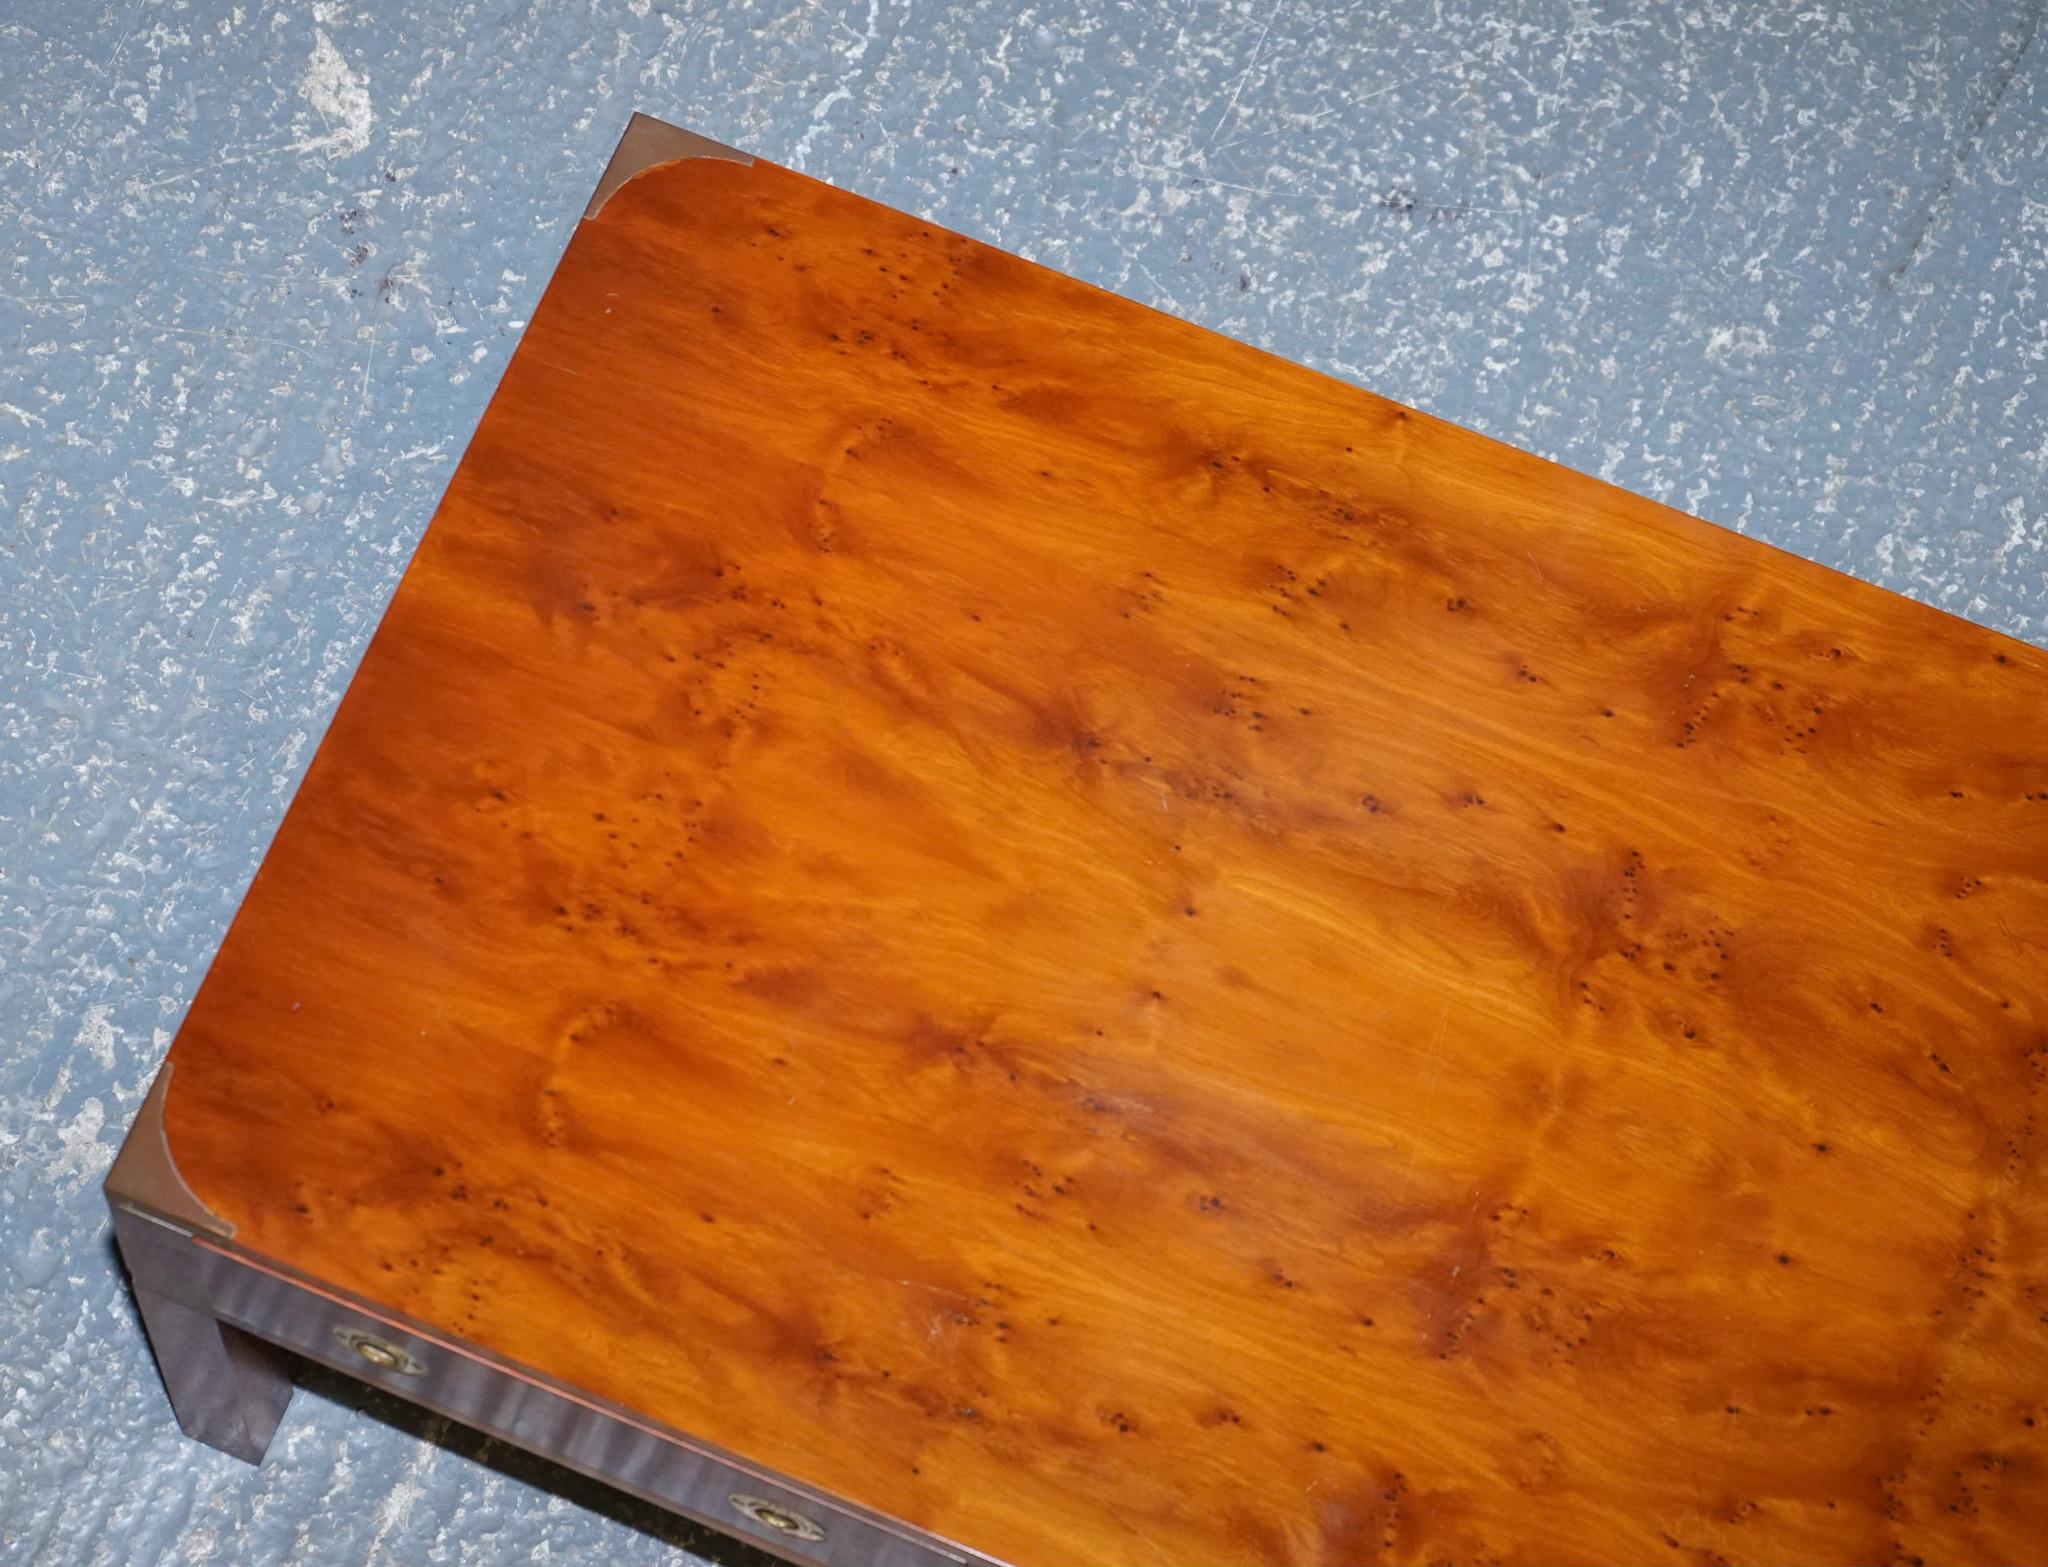 We are delighted to offer for sale this stunning burr yew & elm wood military campaign coffee table retailed by Harrods London.

This piece was retailed through Harrods London; they have used choice cuts of premium burr yew to make this excellent